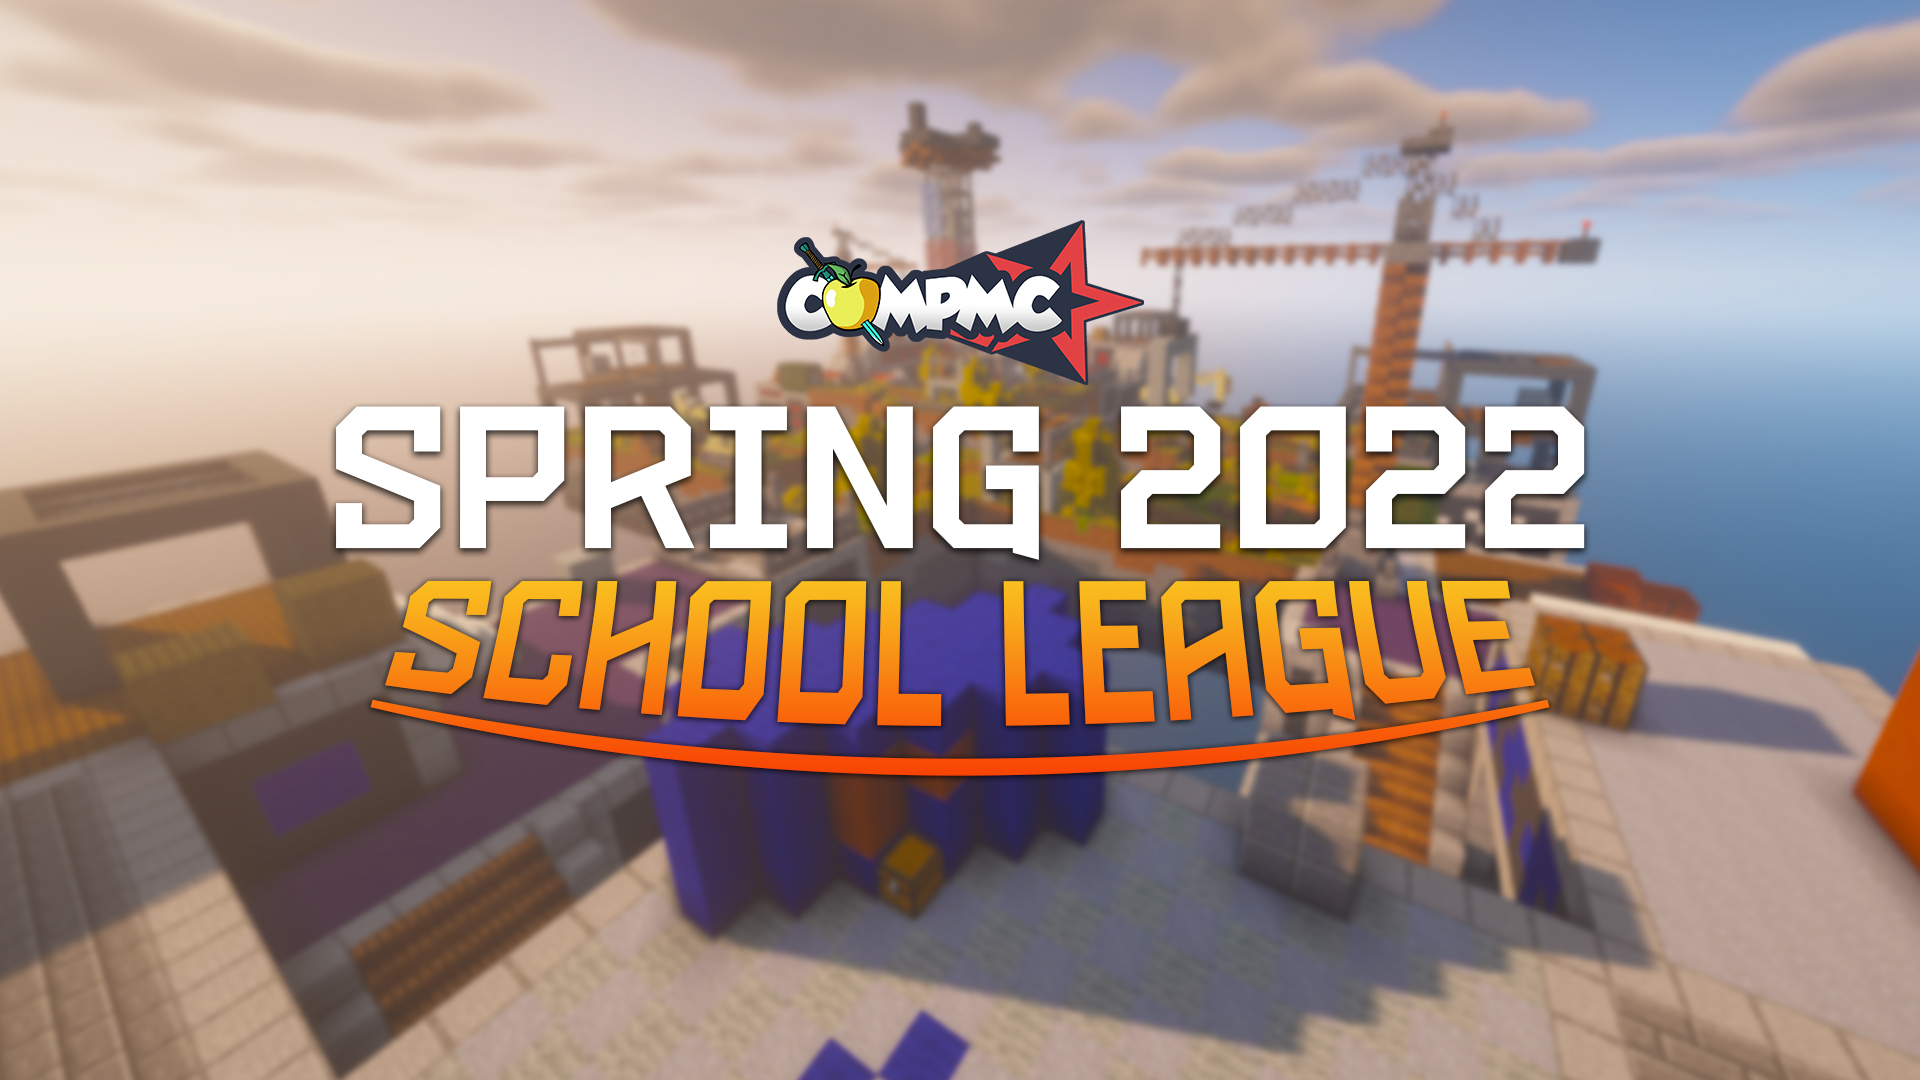 School League Spring 2022 Cover Image